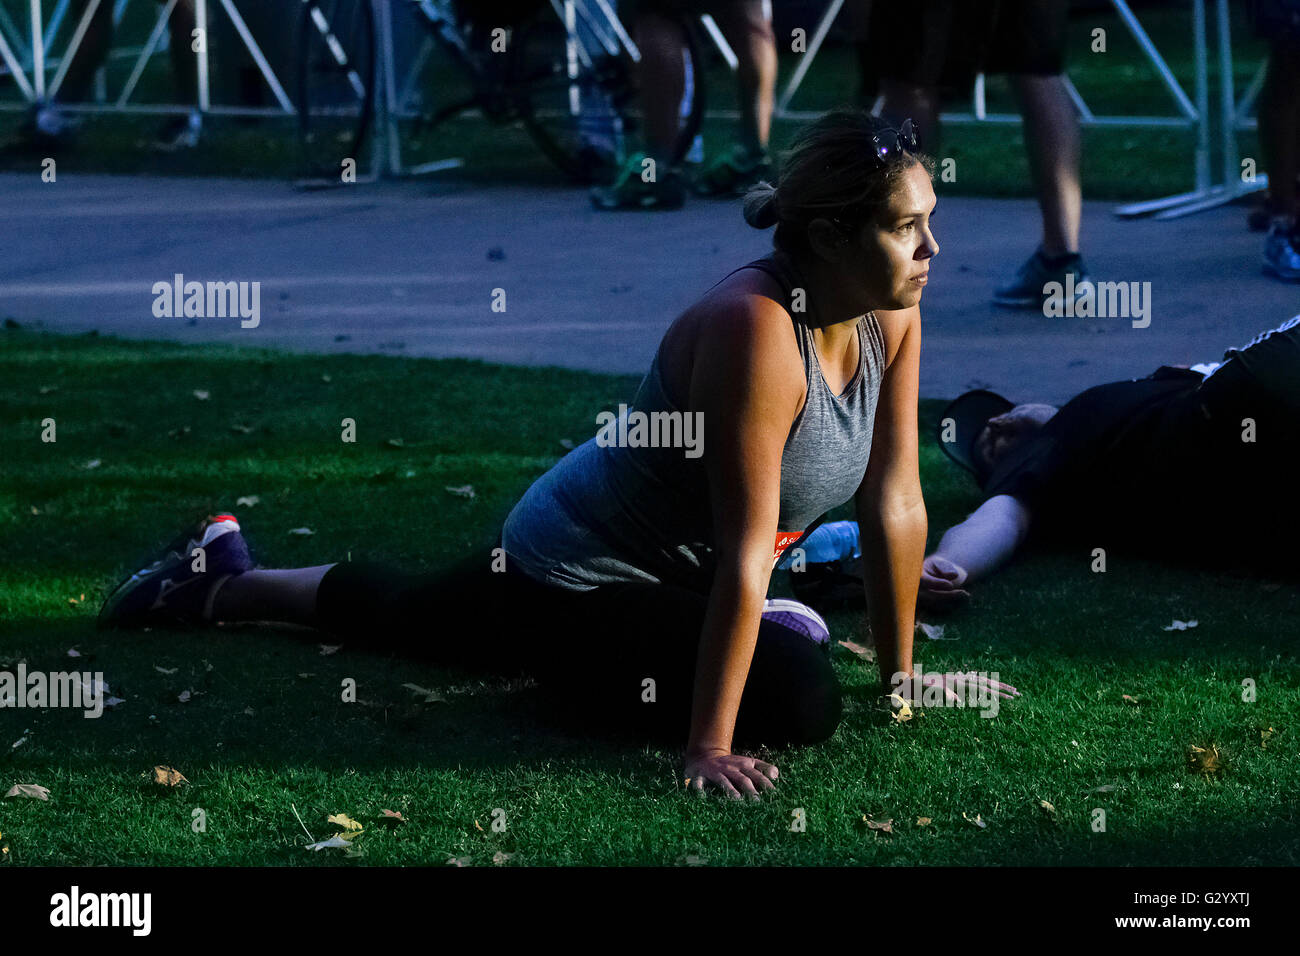 San Diego, California, USA. 5th June, 2016. SAN DIEGO CA, USA -- JUNE 2, 2016: .Kristin Monti from Las Vegas used the early arrival break to stretch before the start of the Suja Rock 'n' Roll San Diego half marathon in San Diego.Mandatory Credit: PHOTO BY NELVIN C. CEPEDA, SAN DIEGO UNION-TRIBUNE Credit:  Nelvin C. Cepeda/San Diego Union-Tribune/ZUMA Wire/Alamy Live News Stock Photo